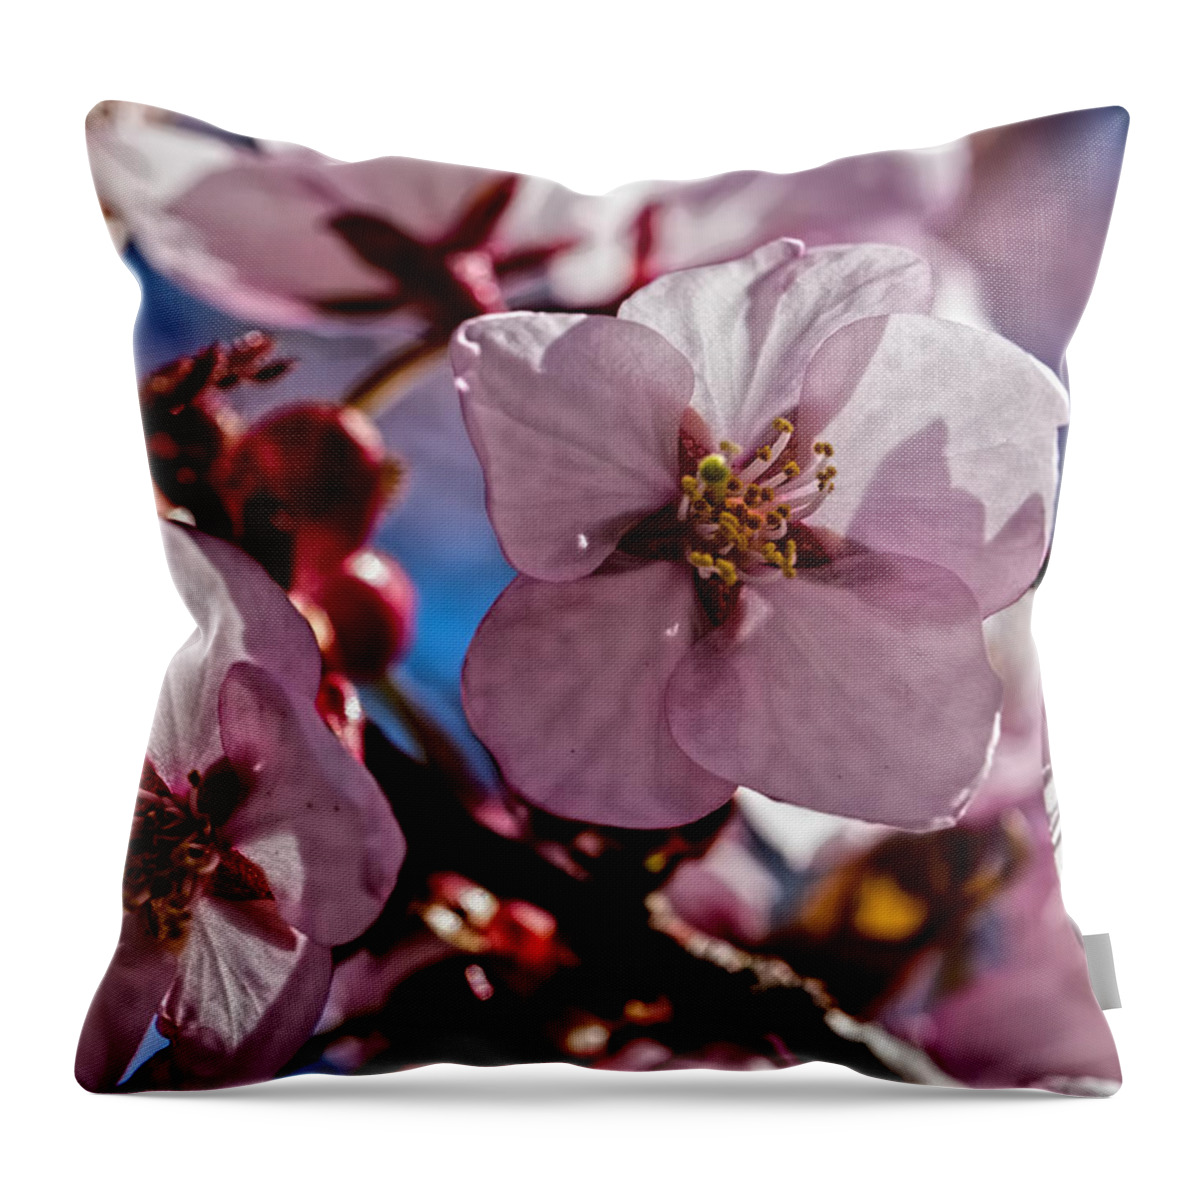 Enk�ping Throw Pillow featuring the photograph Cherry blossom by Leif Sohlman by Leif Sohlman